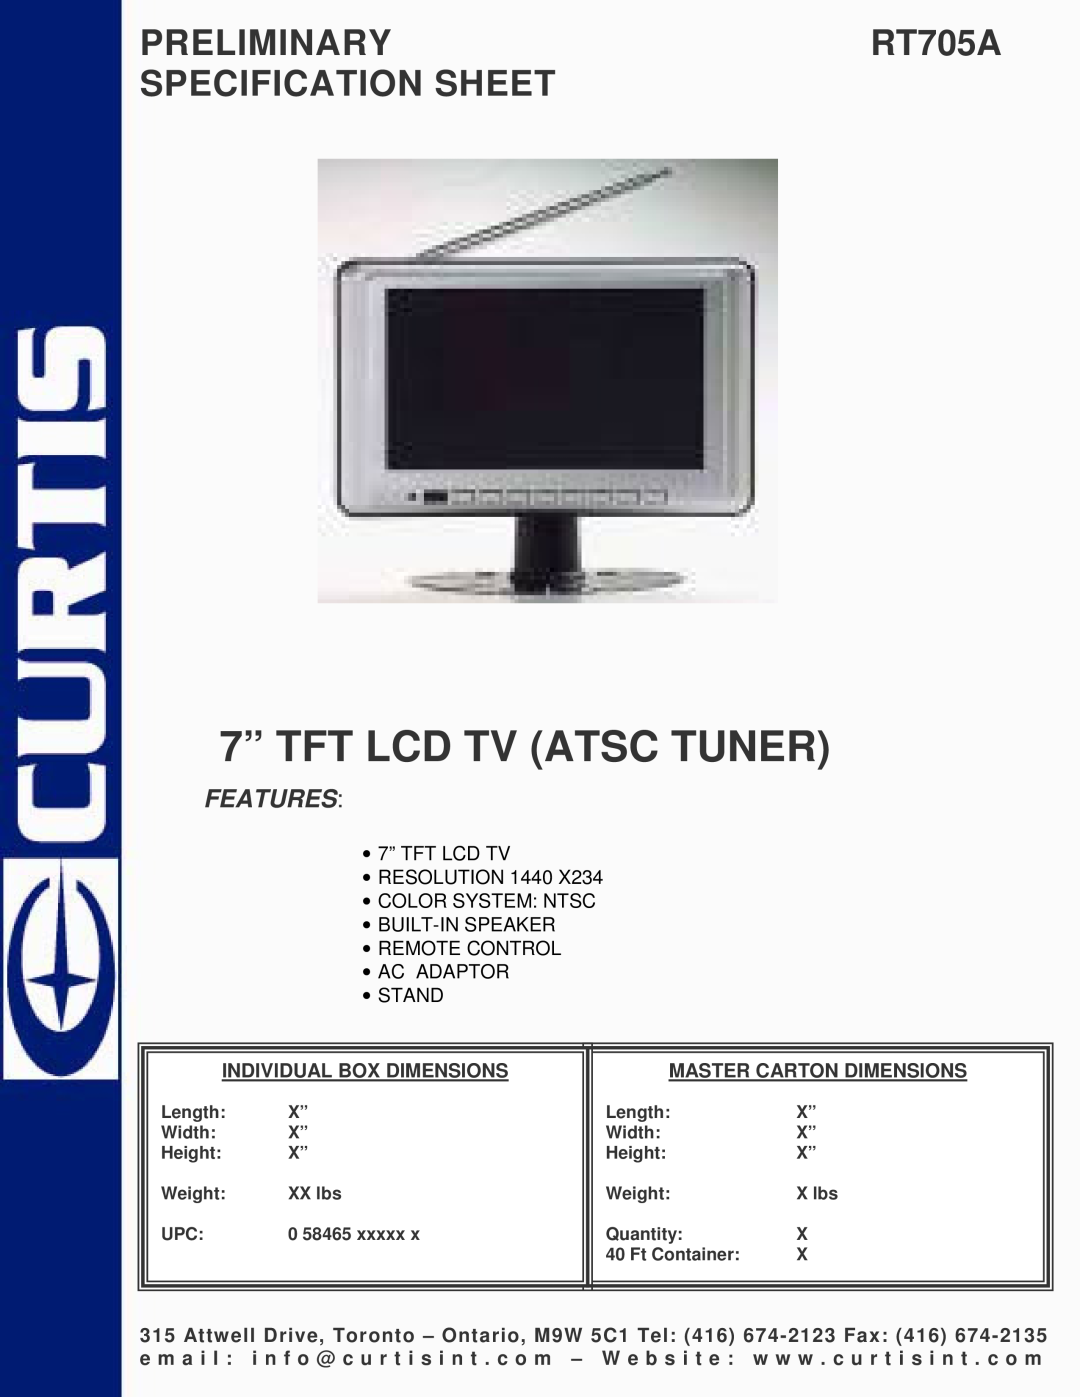 Curtis specifications 7” TFT LCD TV ATSC TUNER, PRELIMINARYRT705A SPECIFICATION SHEET, Features 